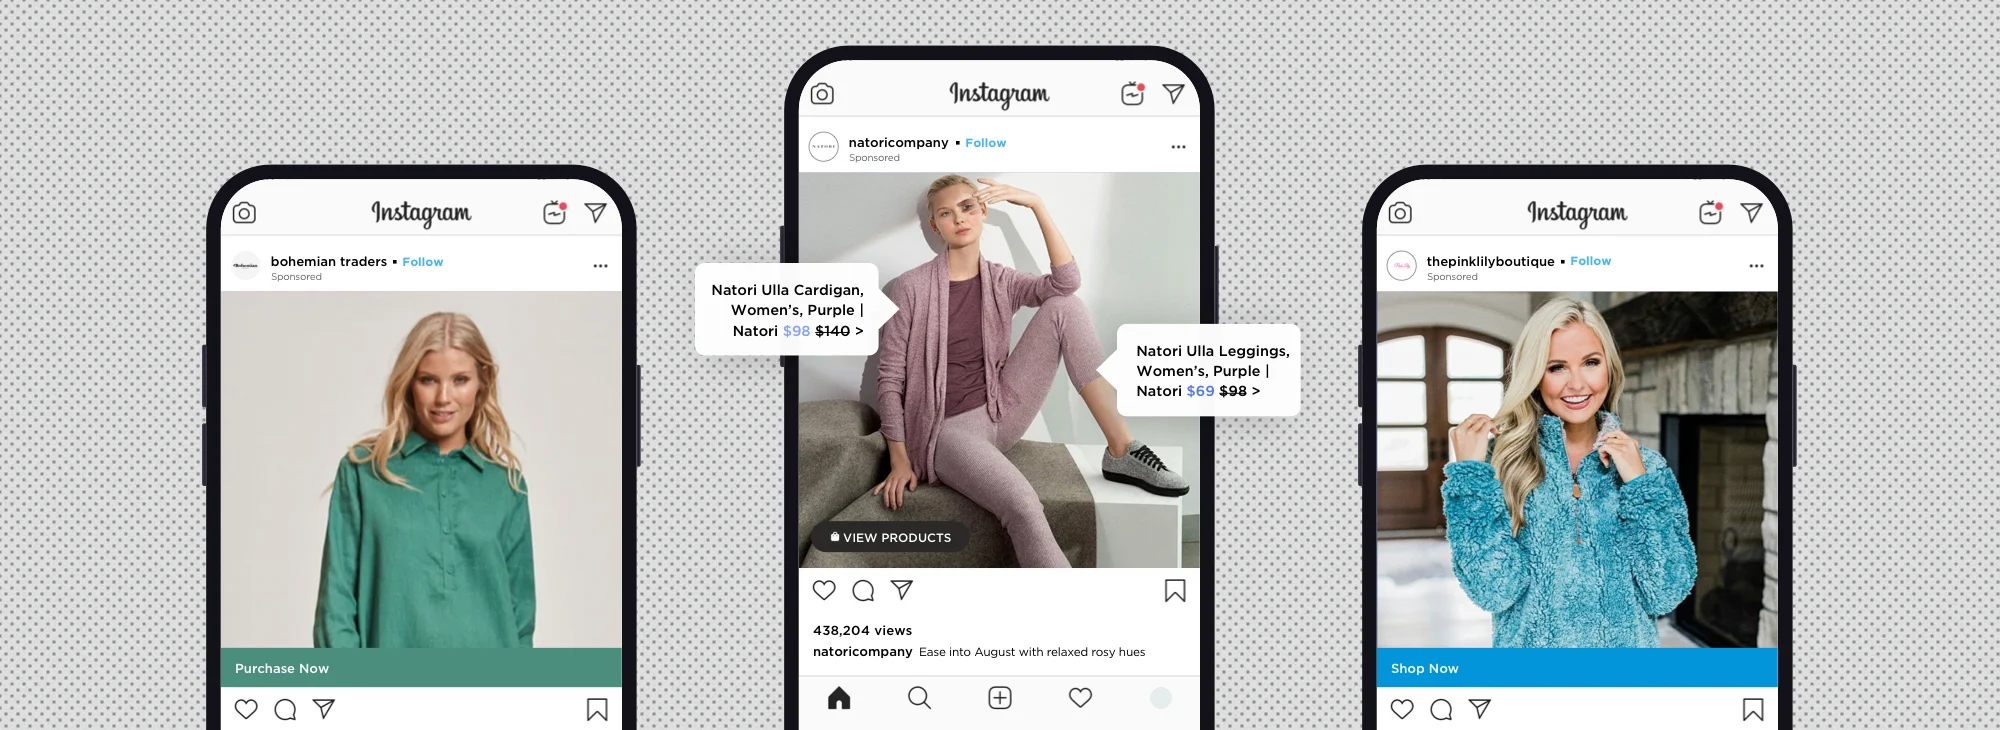 https://cms-wp.bigcommerce.com/wp-content/uploads/2019/11/2019-August-Content-Blog-Headers_Batch-2-2-How-To-Advertise-On-Instagram-34CD-MT-@1x.png